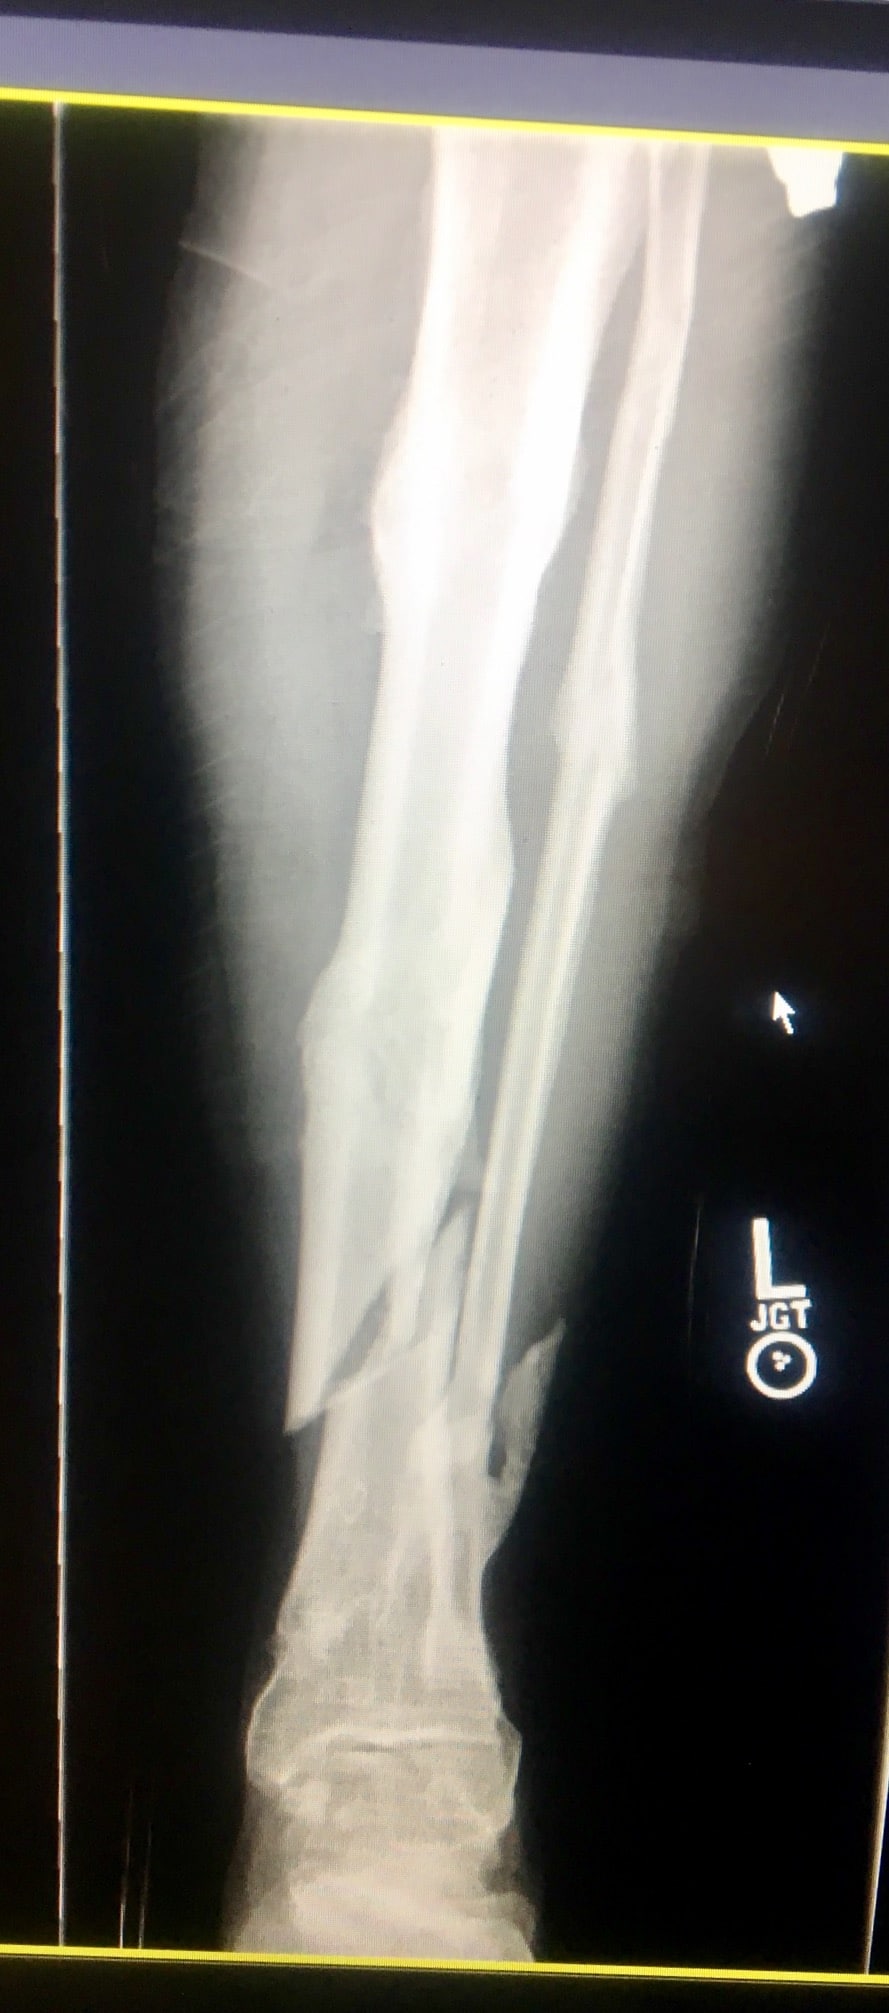 Tibia fracture in athletes – Howard J. Luks, MD